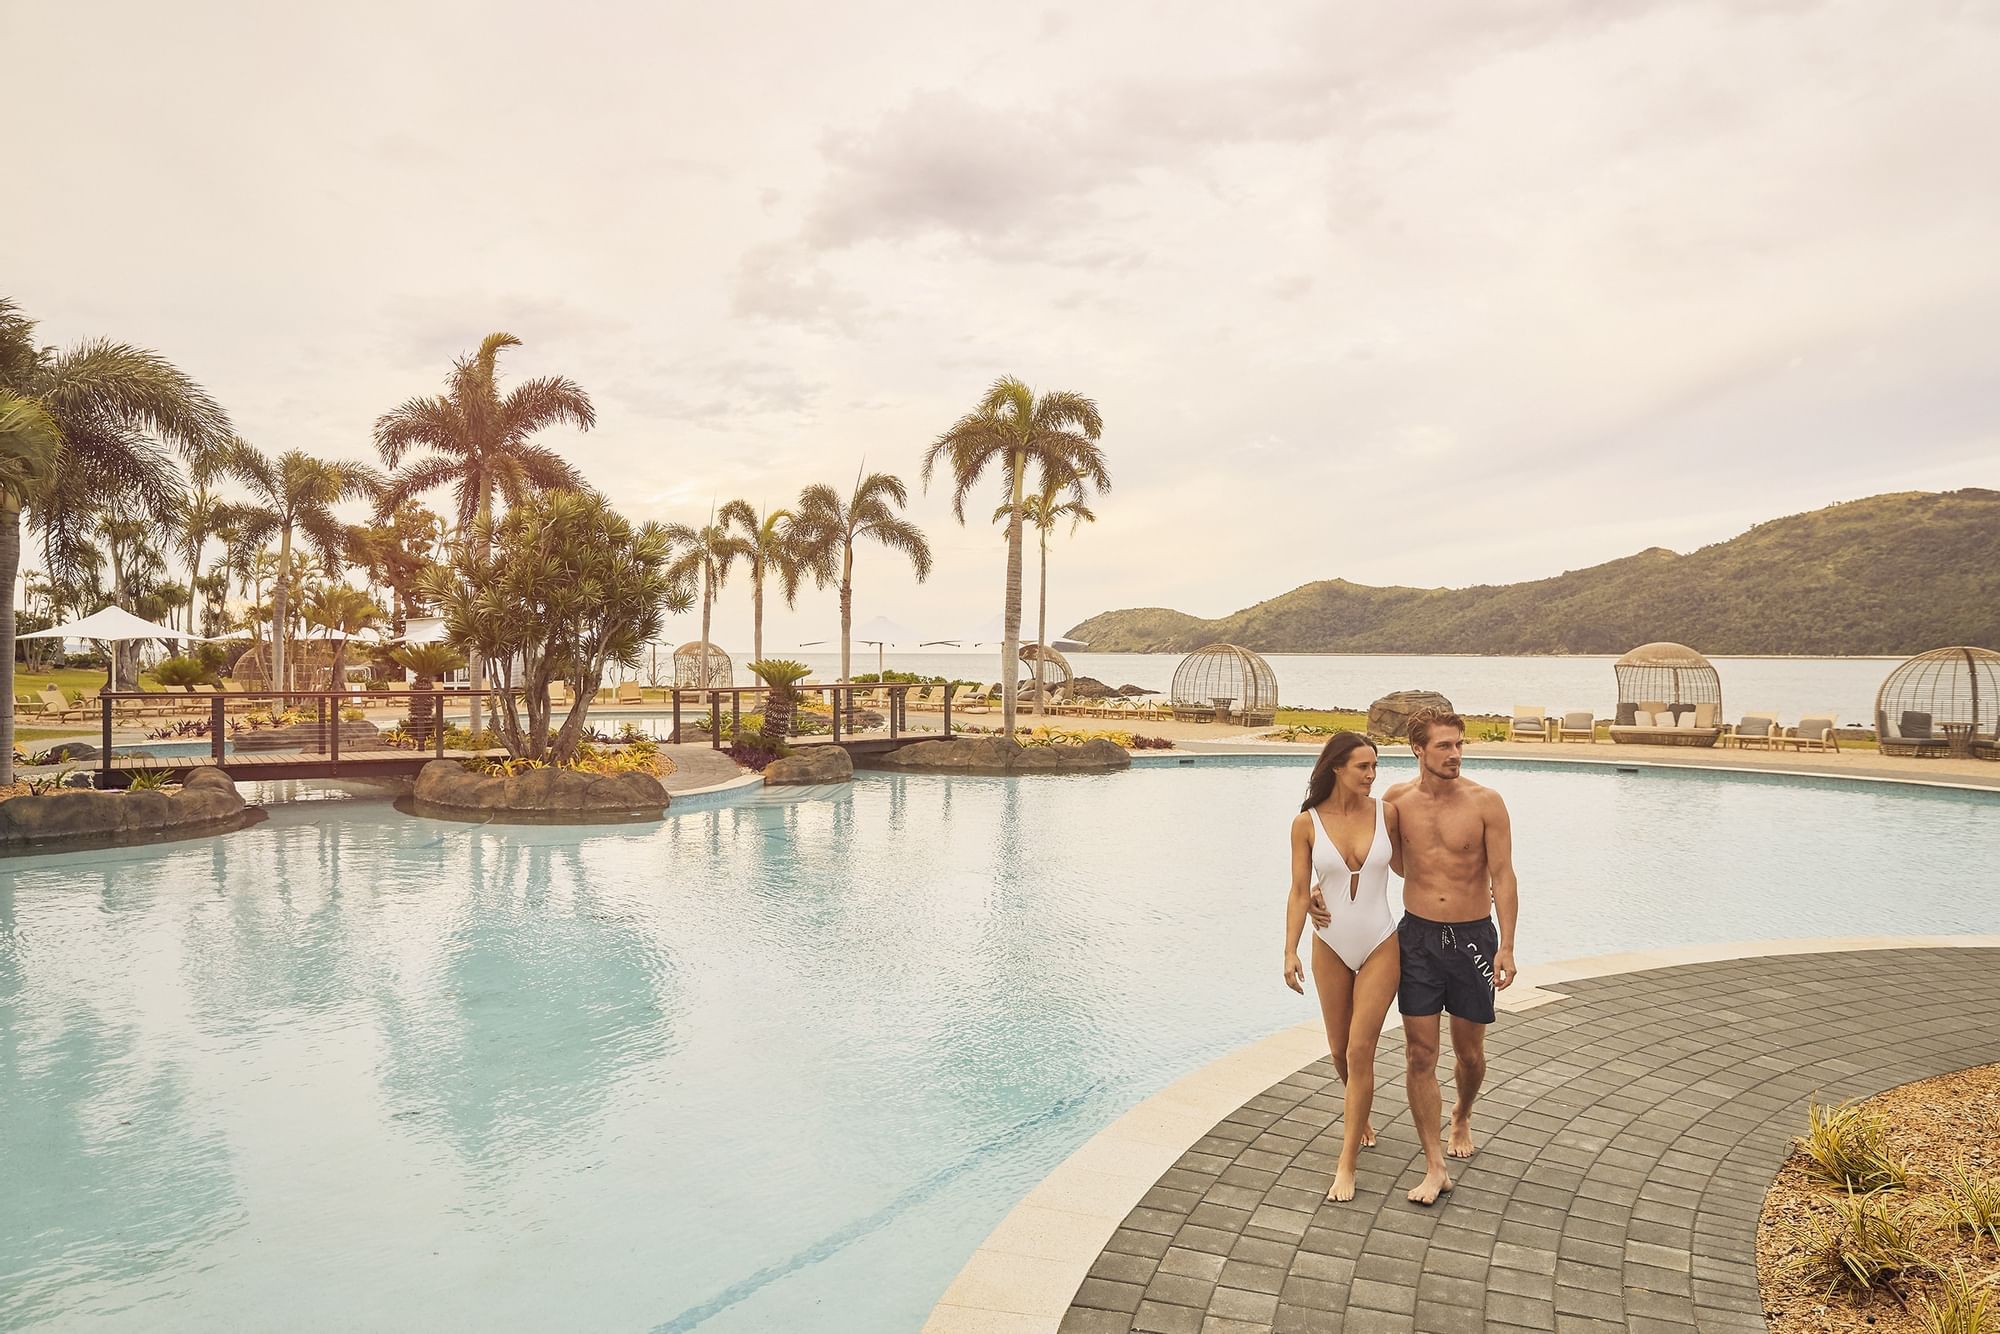 Couple posing by the pool deck at Daydream Island Resort